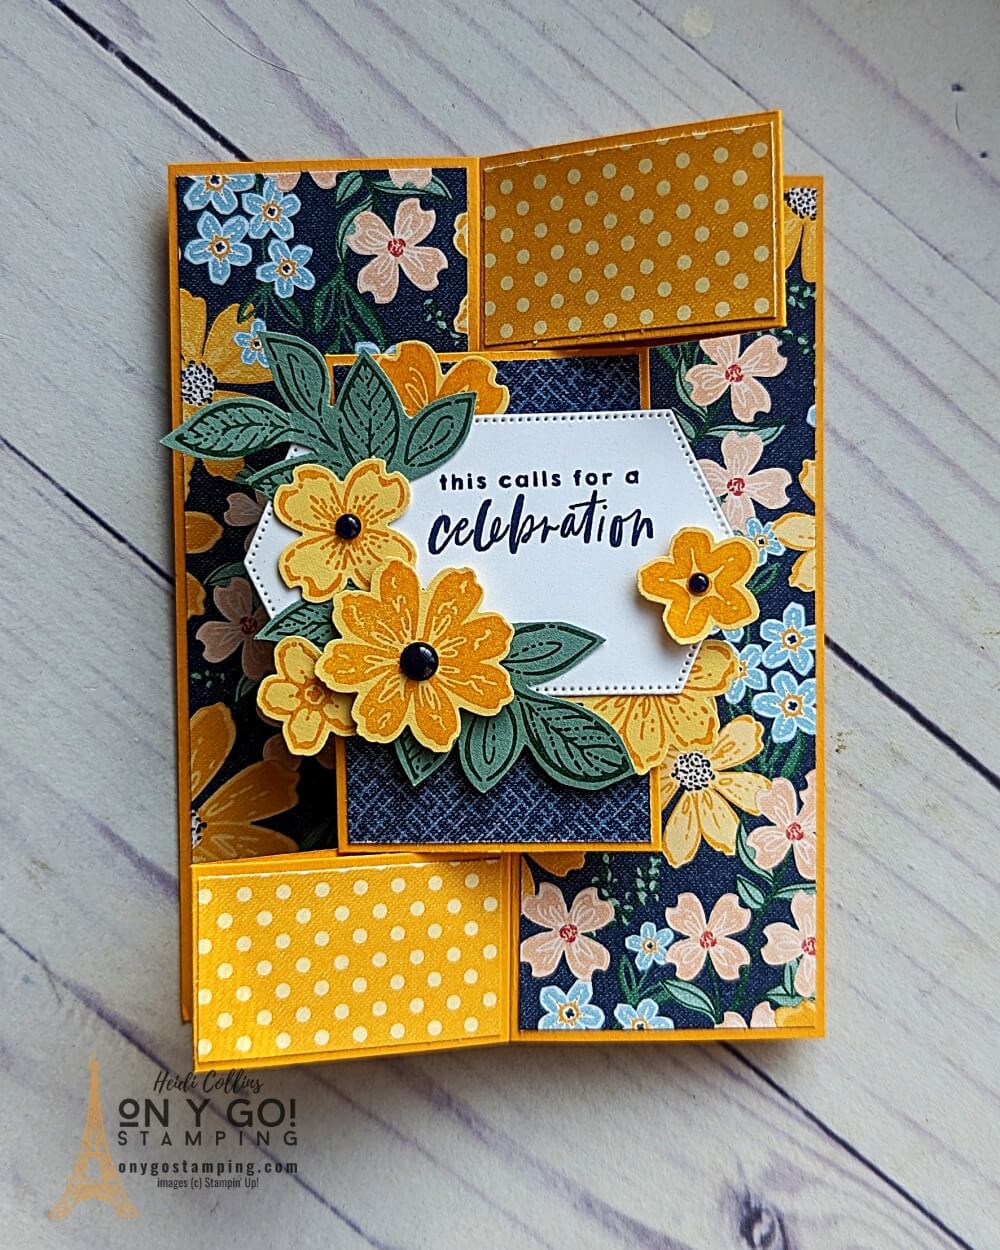 Create a stunning pop out gate fold card with the Petal Park stamp set from Stampin' Up!® and Regency Park DSP--perfect for any occasion! With an adorable floral design and the coordinating paper, this card will be sure to make a lasting impression. The bright colors will really make the card stand out--and you won't want to miss out on this fun fold card design!